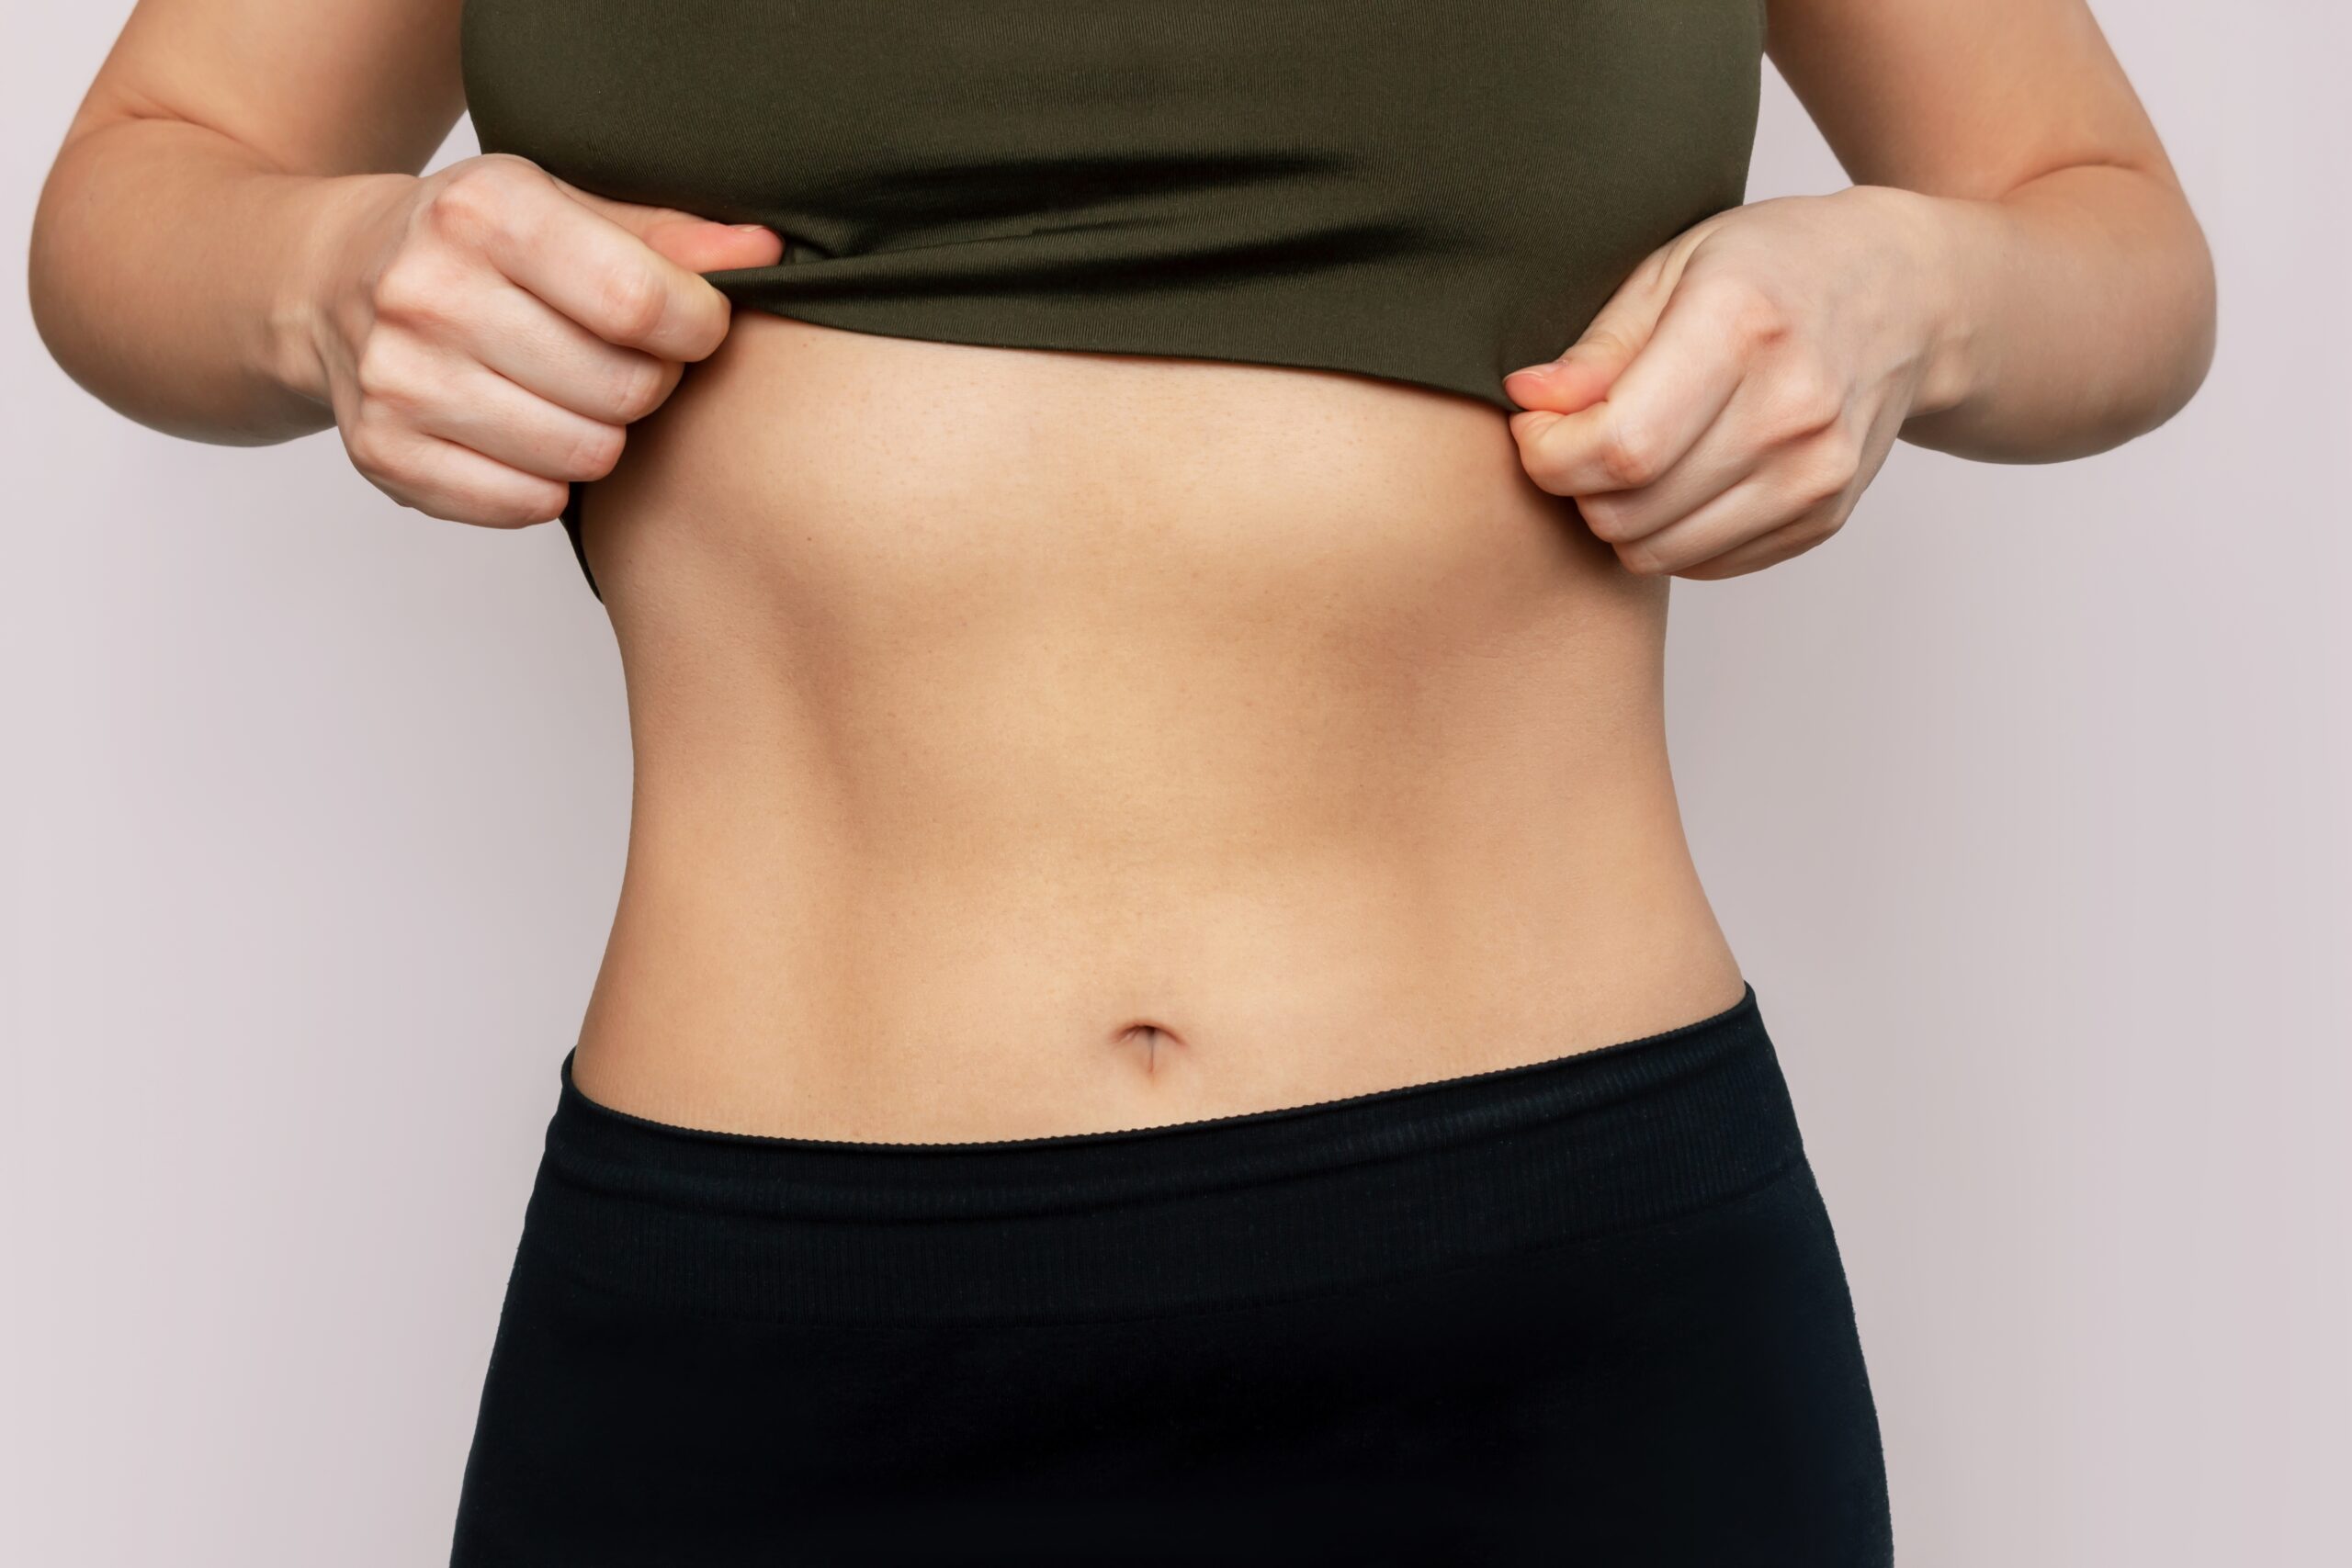 Tips for Maximizing Results and Enhancing the Overall Experience of CoolSculpting